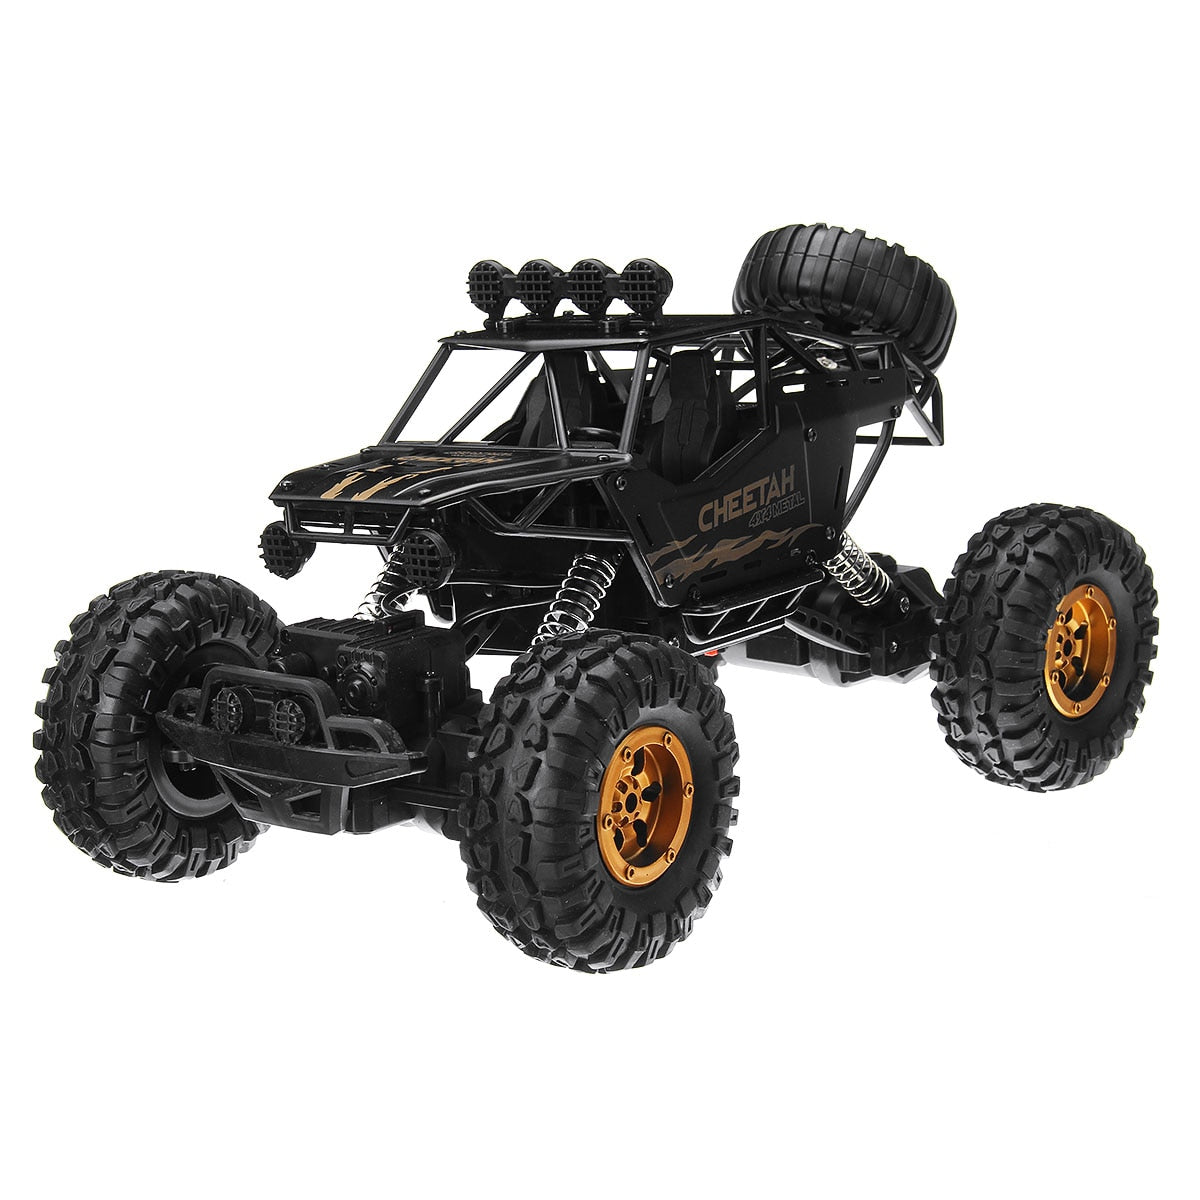 36cm 1:12 4WD RC Cars Updated Version 2.4G Radio Control RC Cars Toys Buggy~High speed Trucks Off-Road Trucks Toys for Children